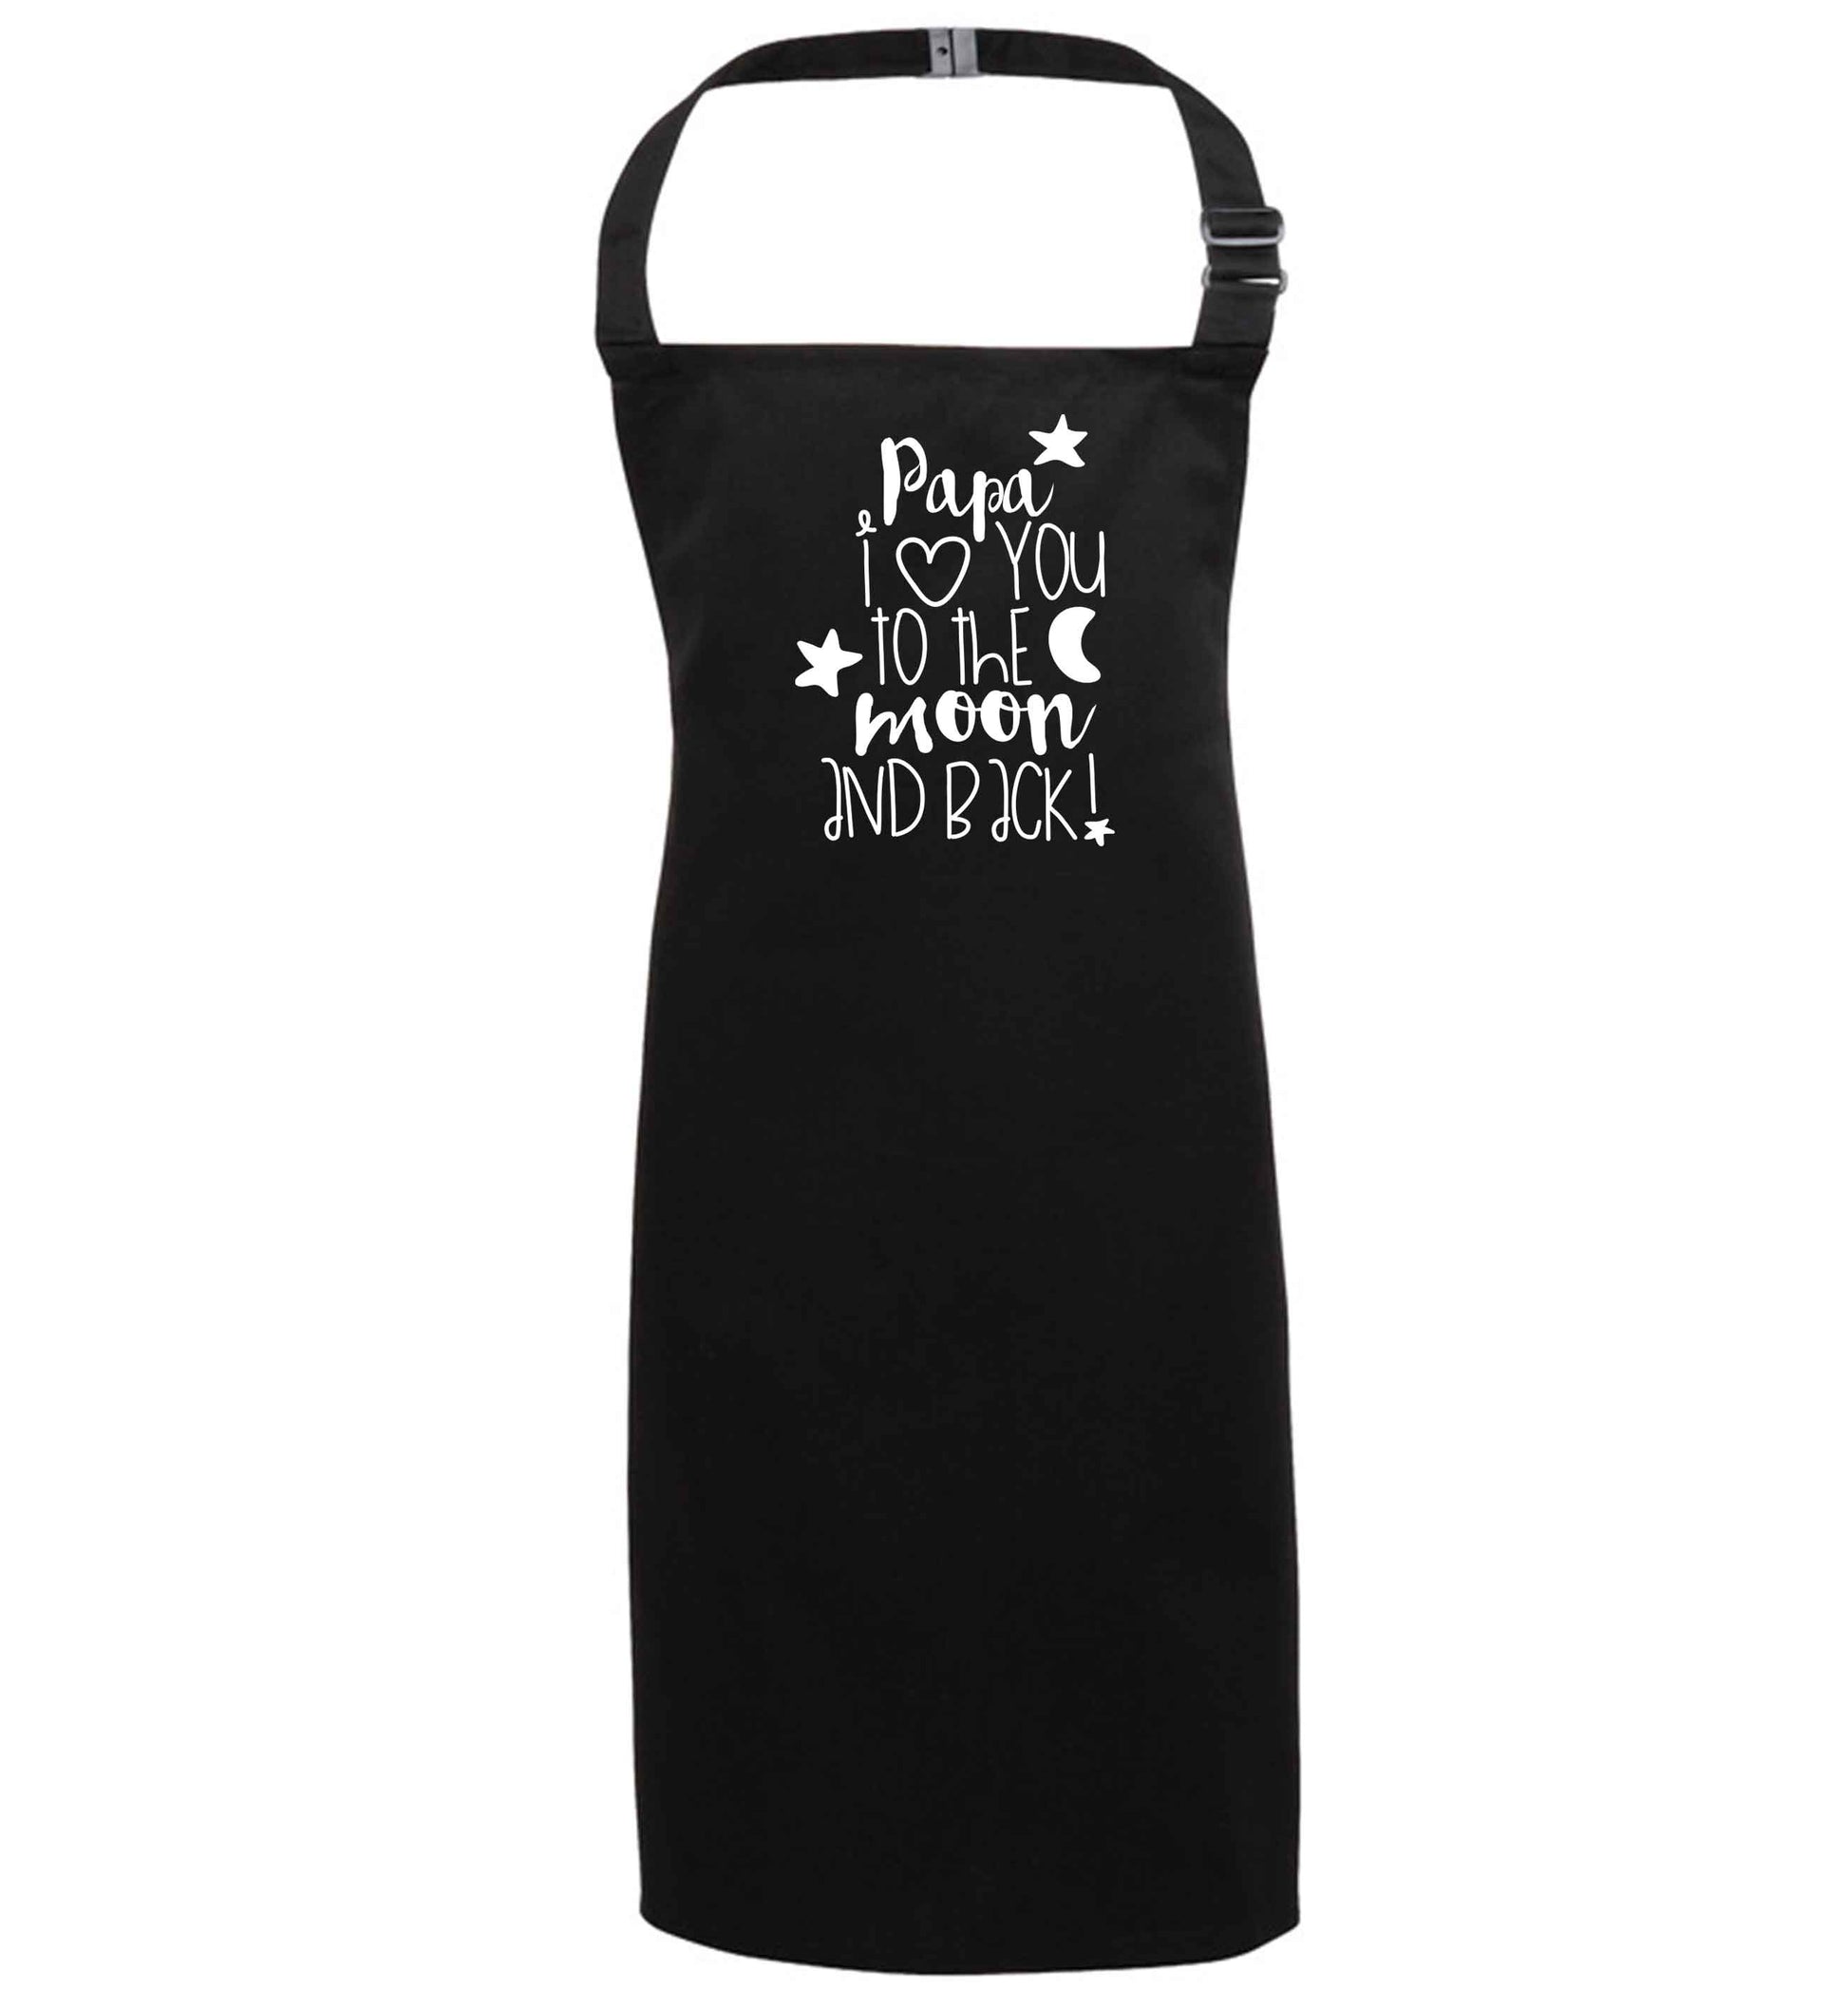 Papa I love you to the moon and back black apron 7-10 years